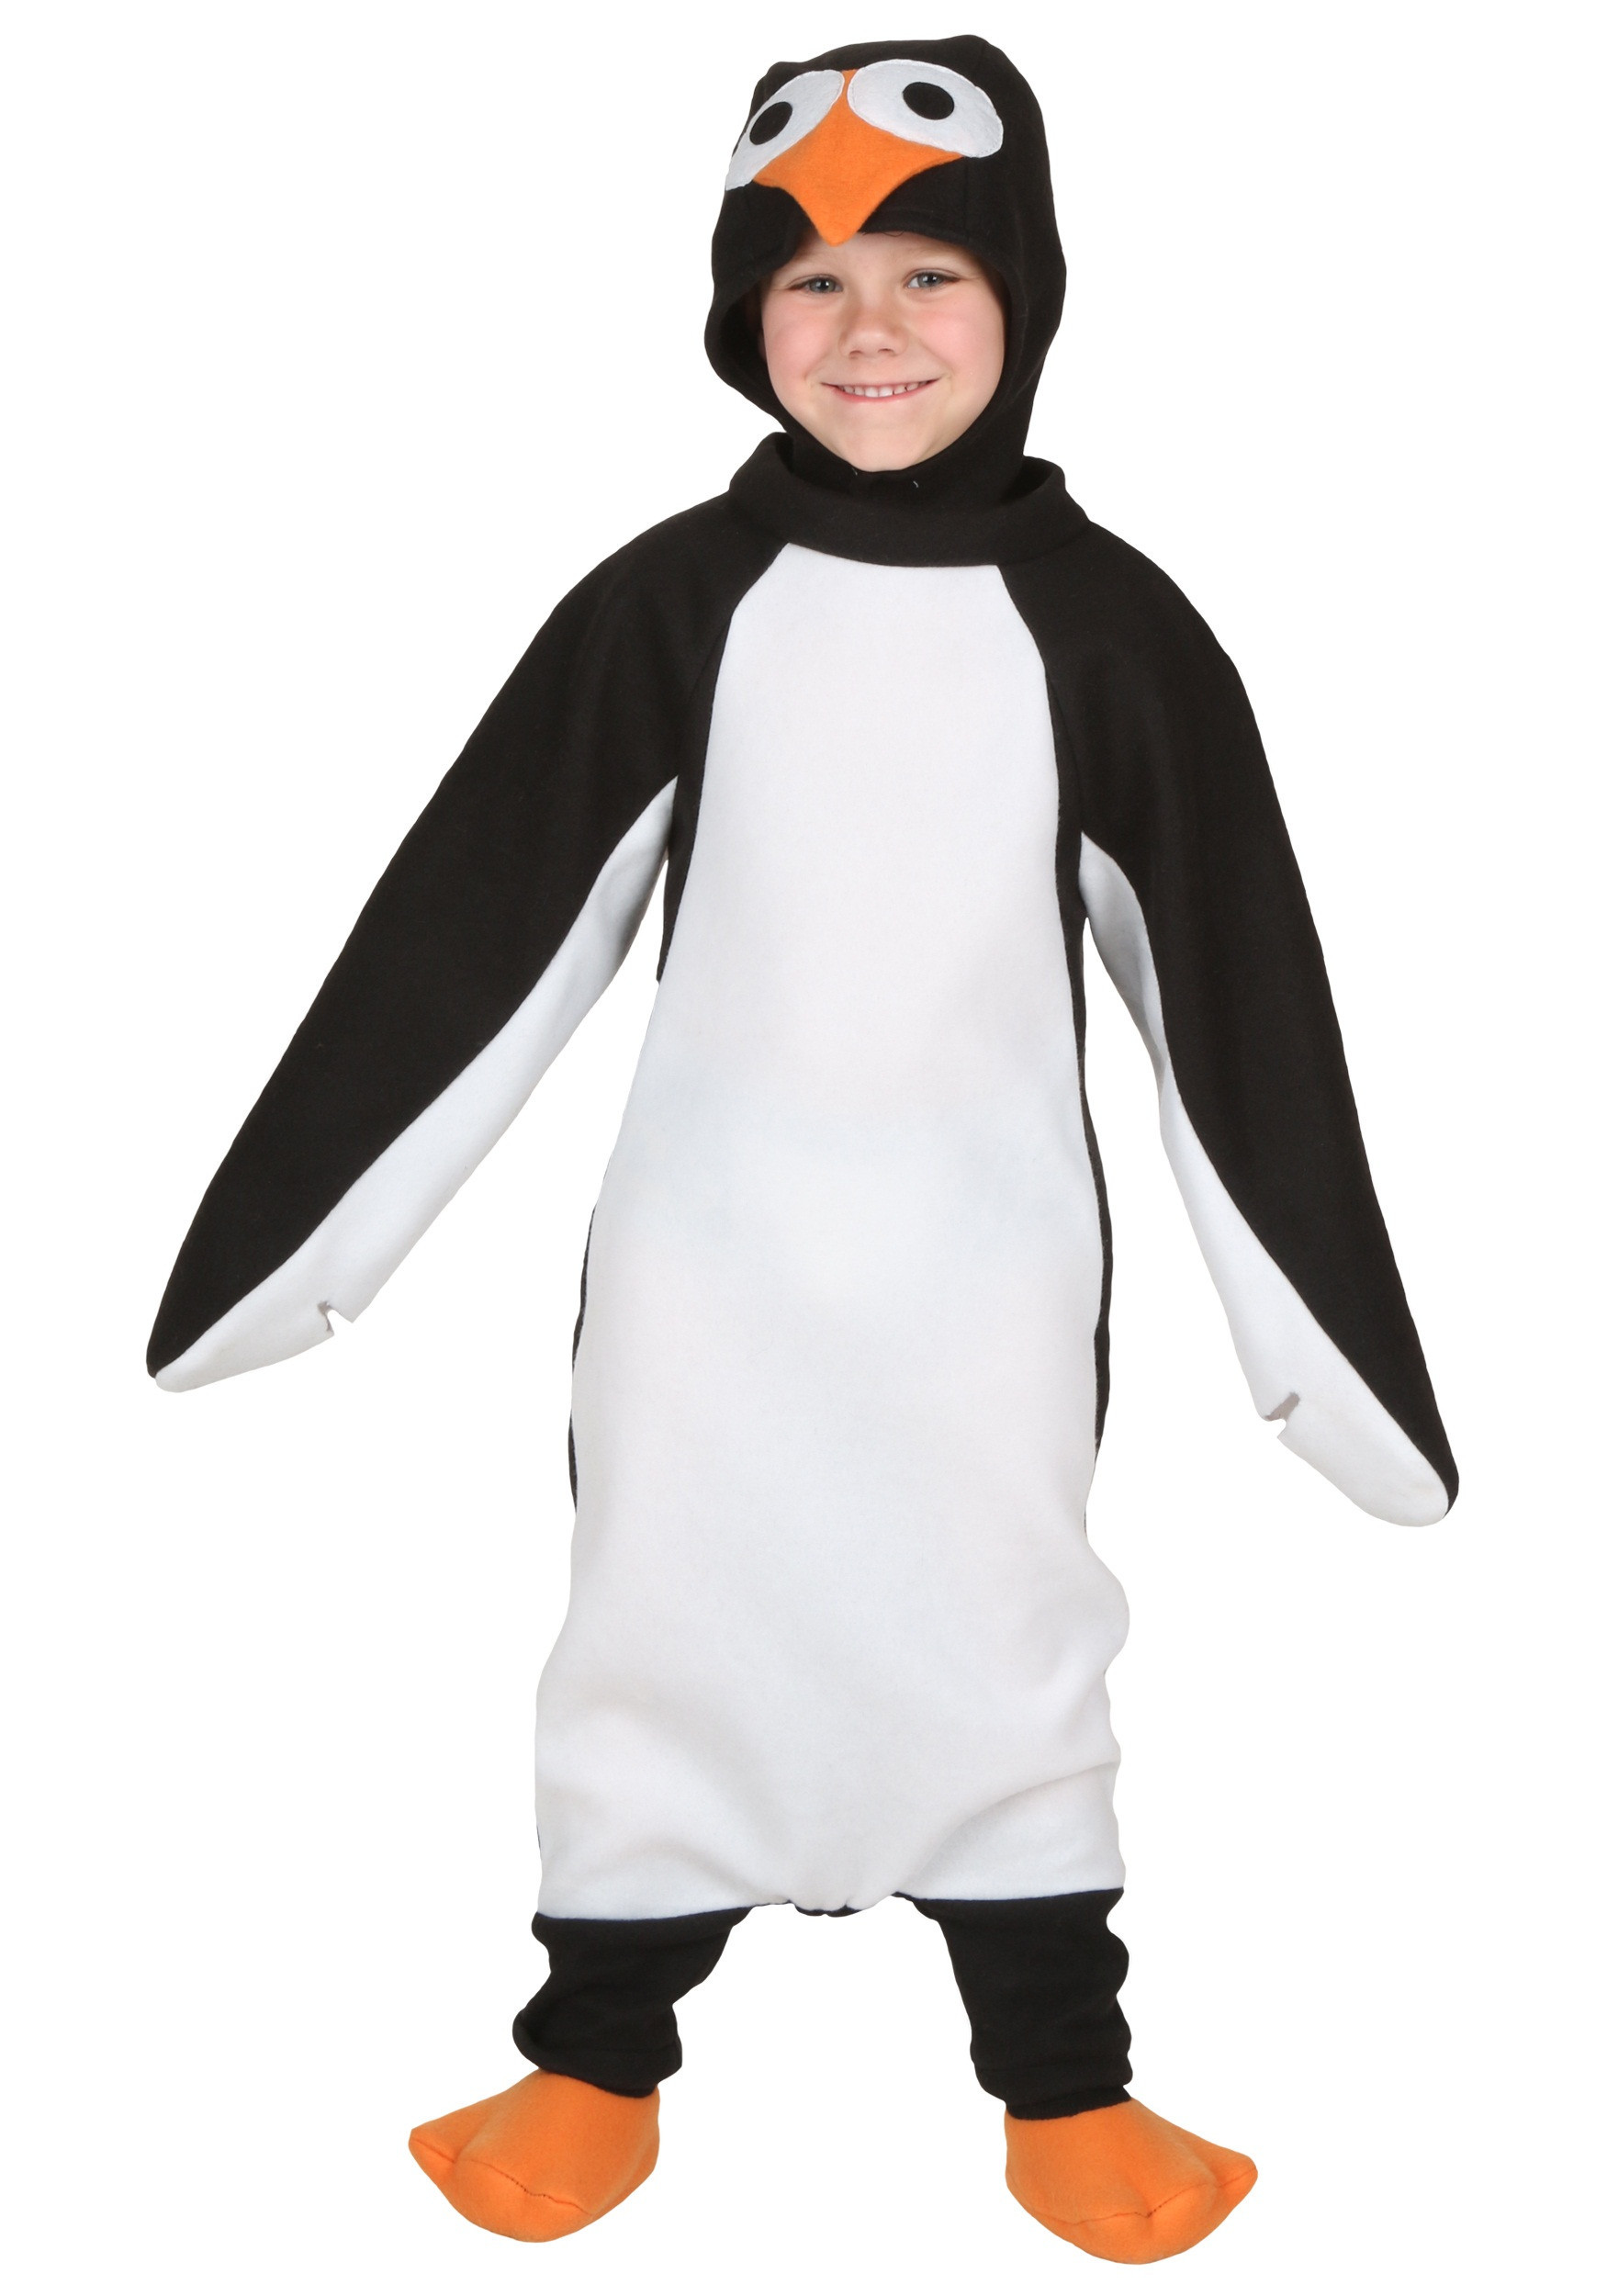 Penguin Costumes DIY
 35 the Best Ideas for Penguin Costumes Diy Home